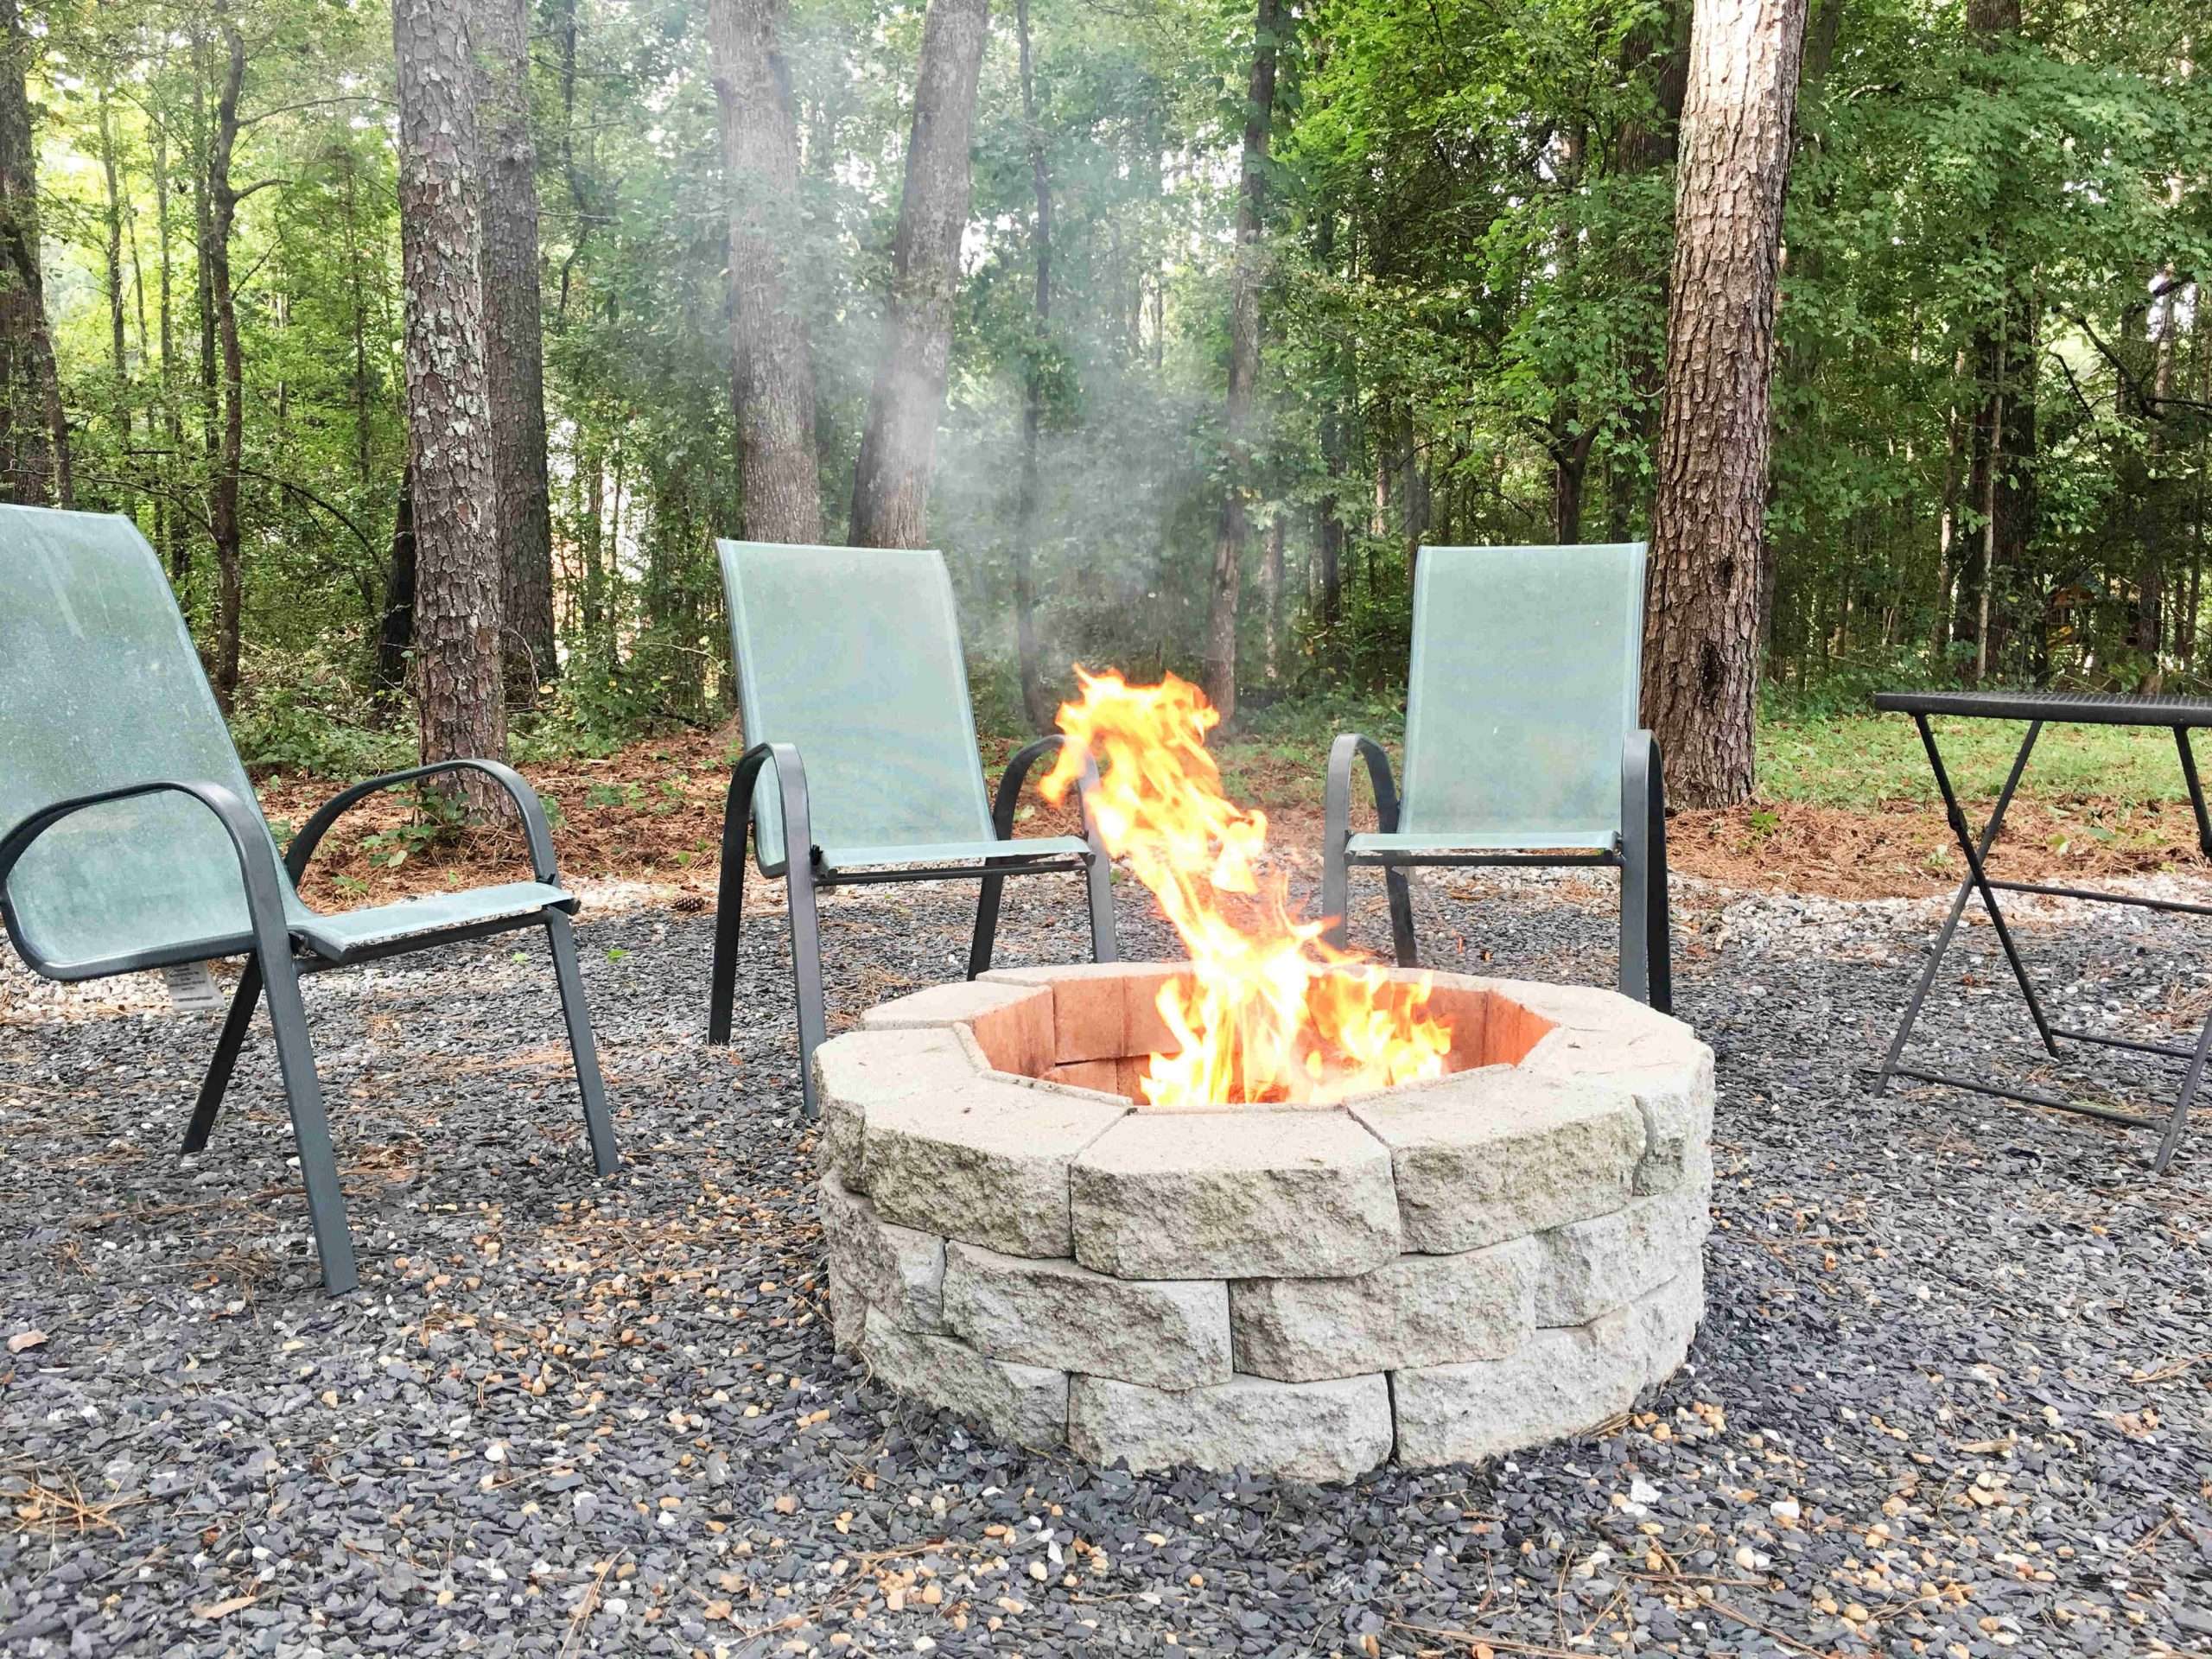 How to Make a DIY Fire Pit in Your Backyard